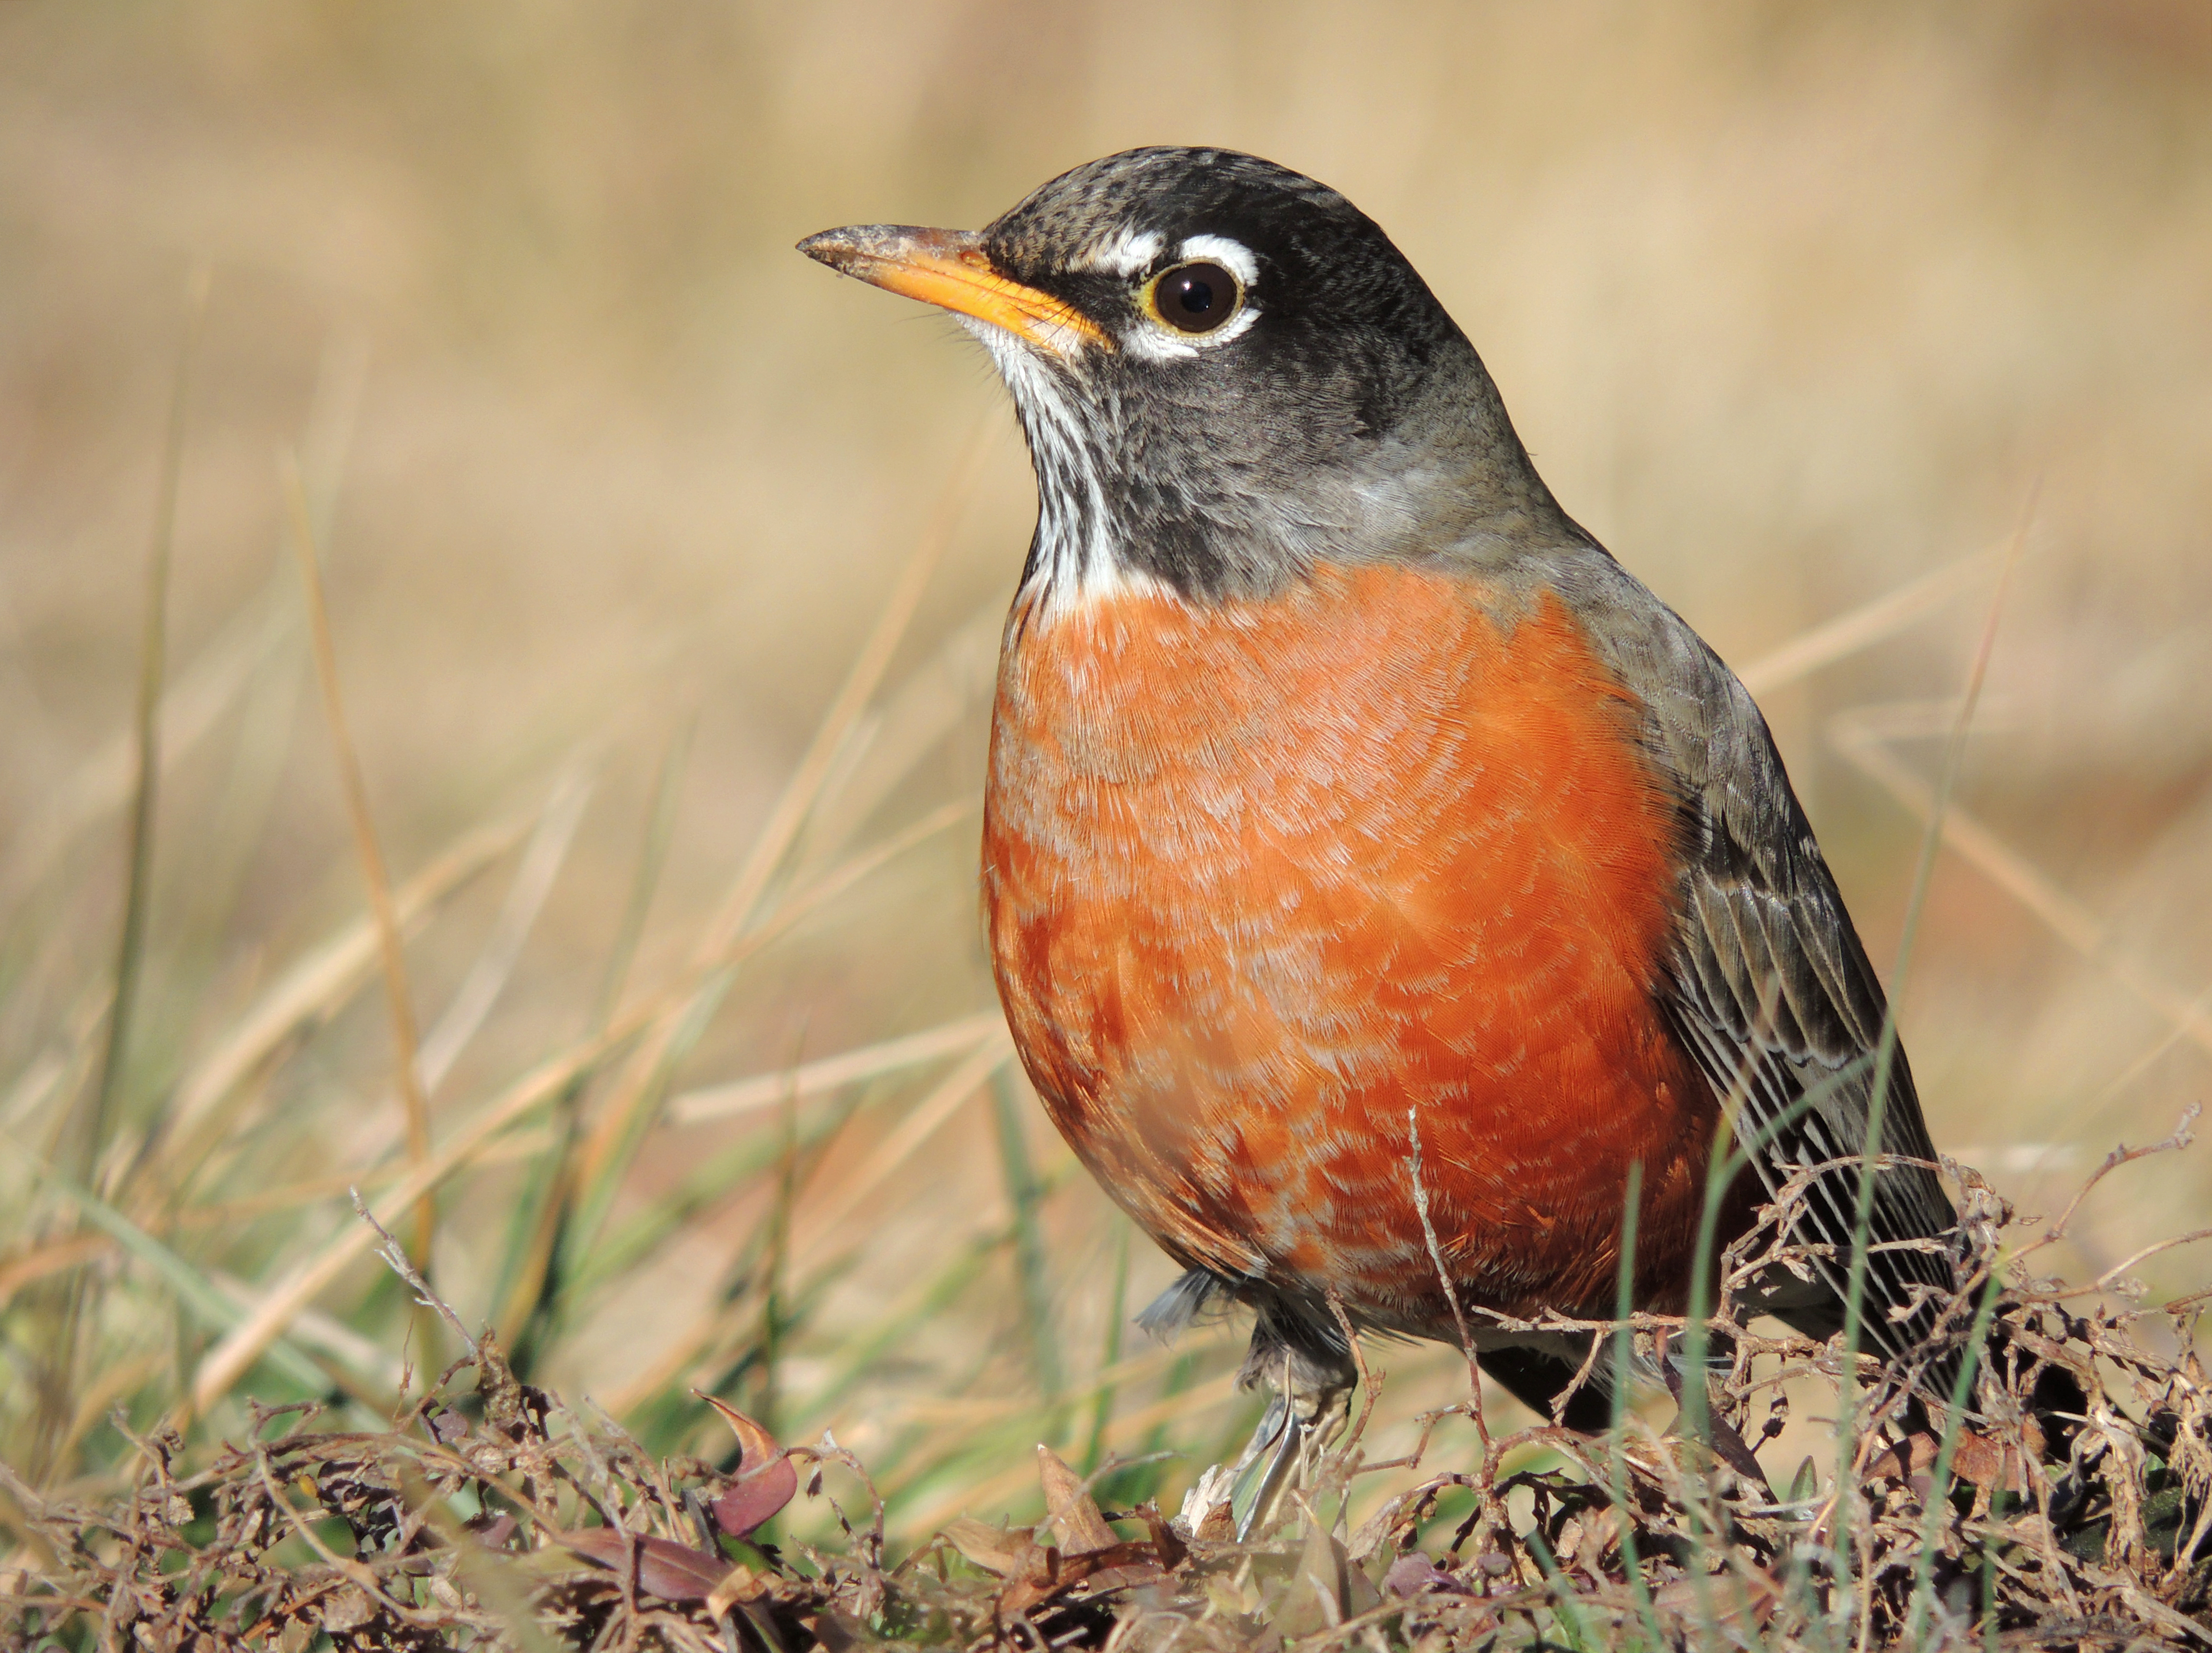 American robin photos found on the web.